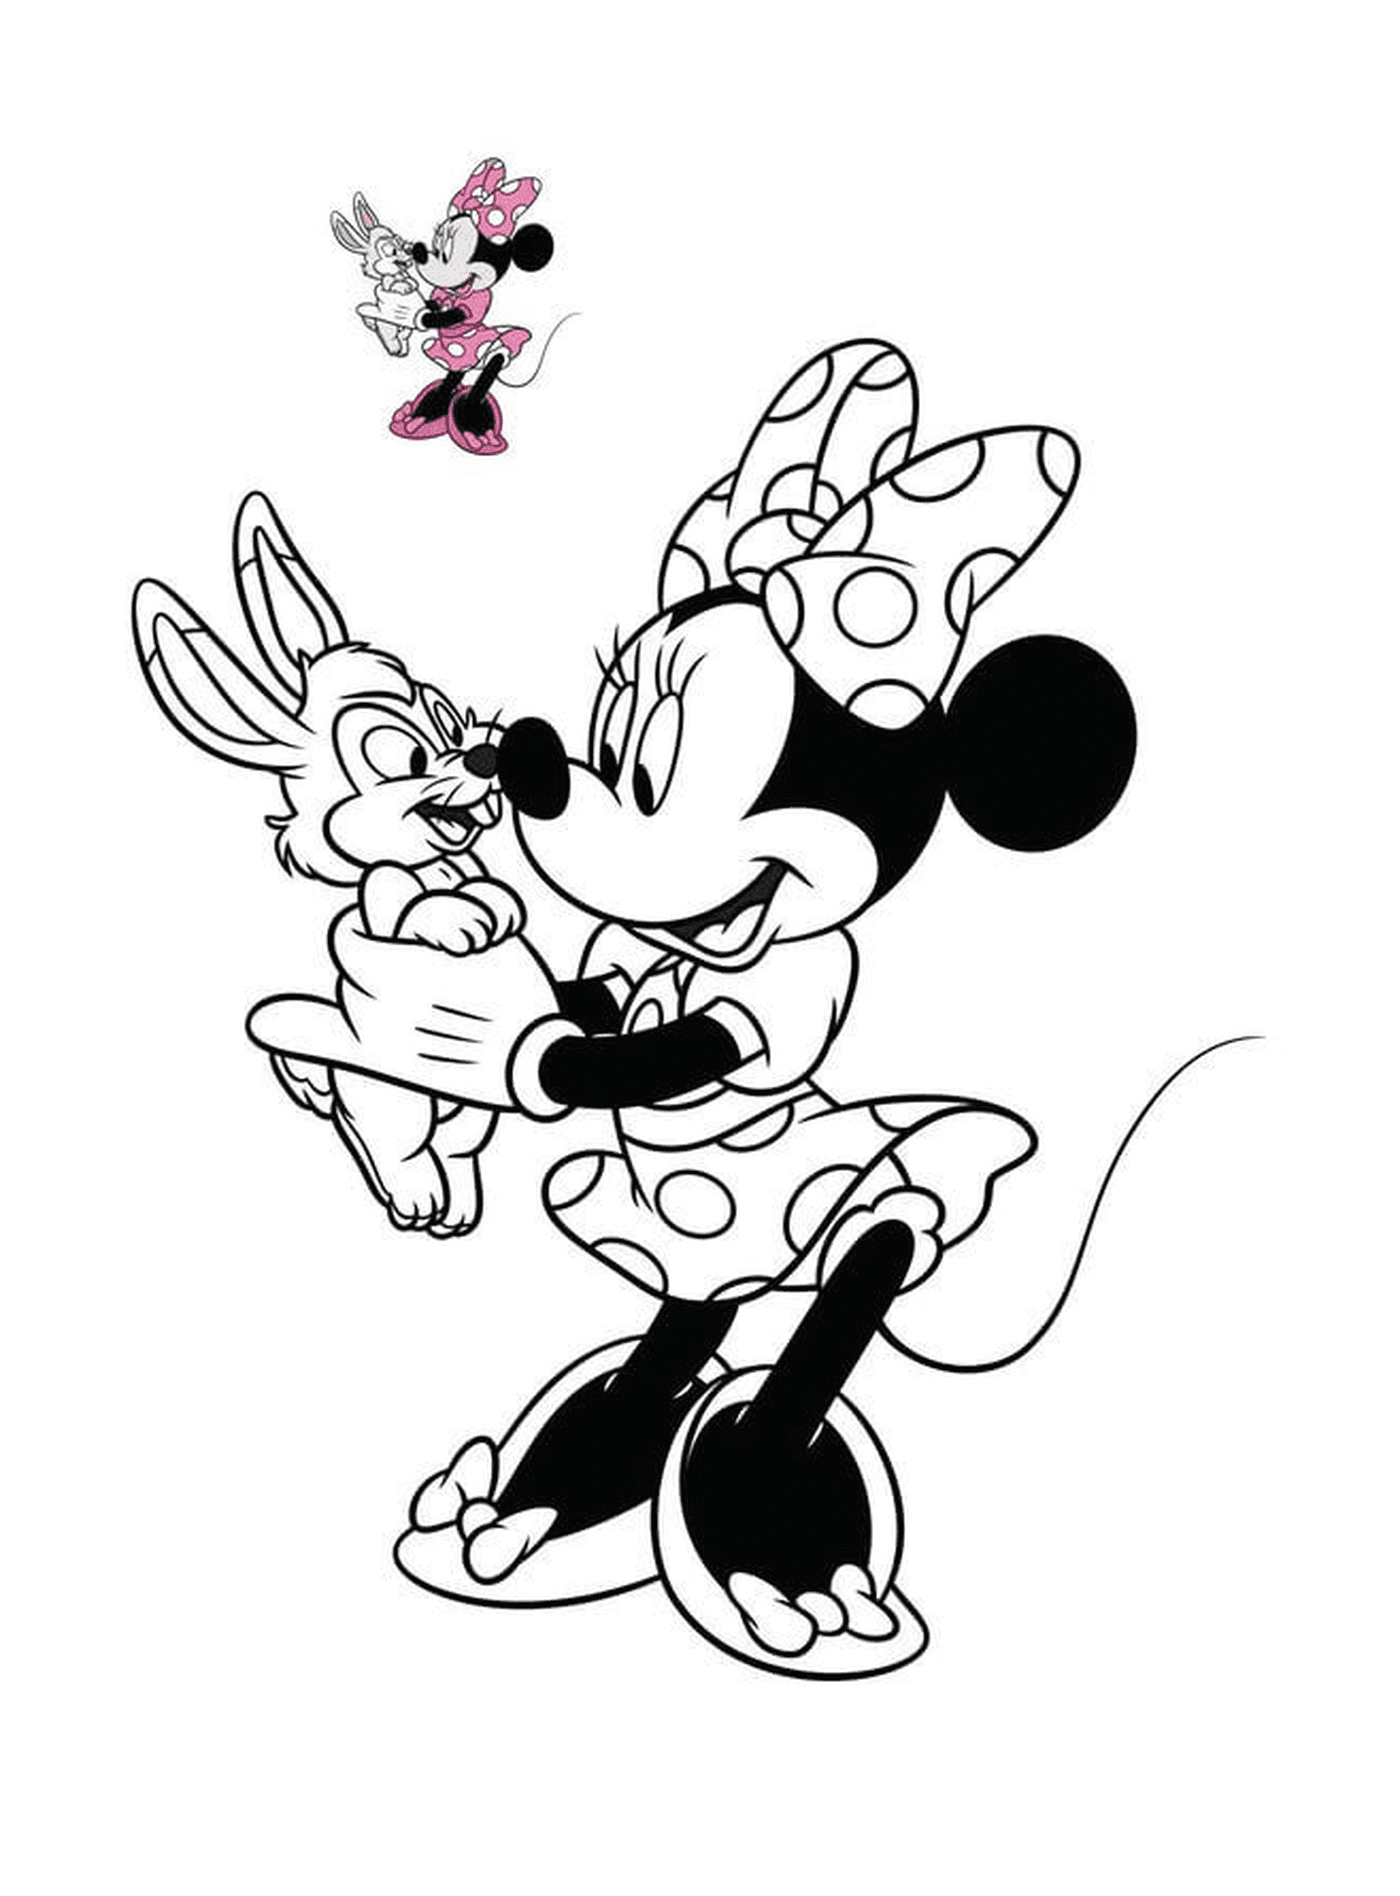  Minnie Mouse with a Disney rabbit 